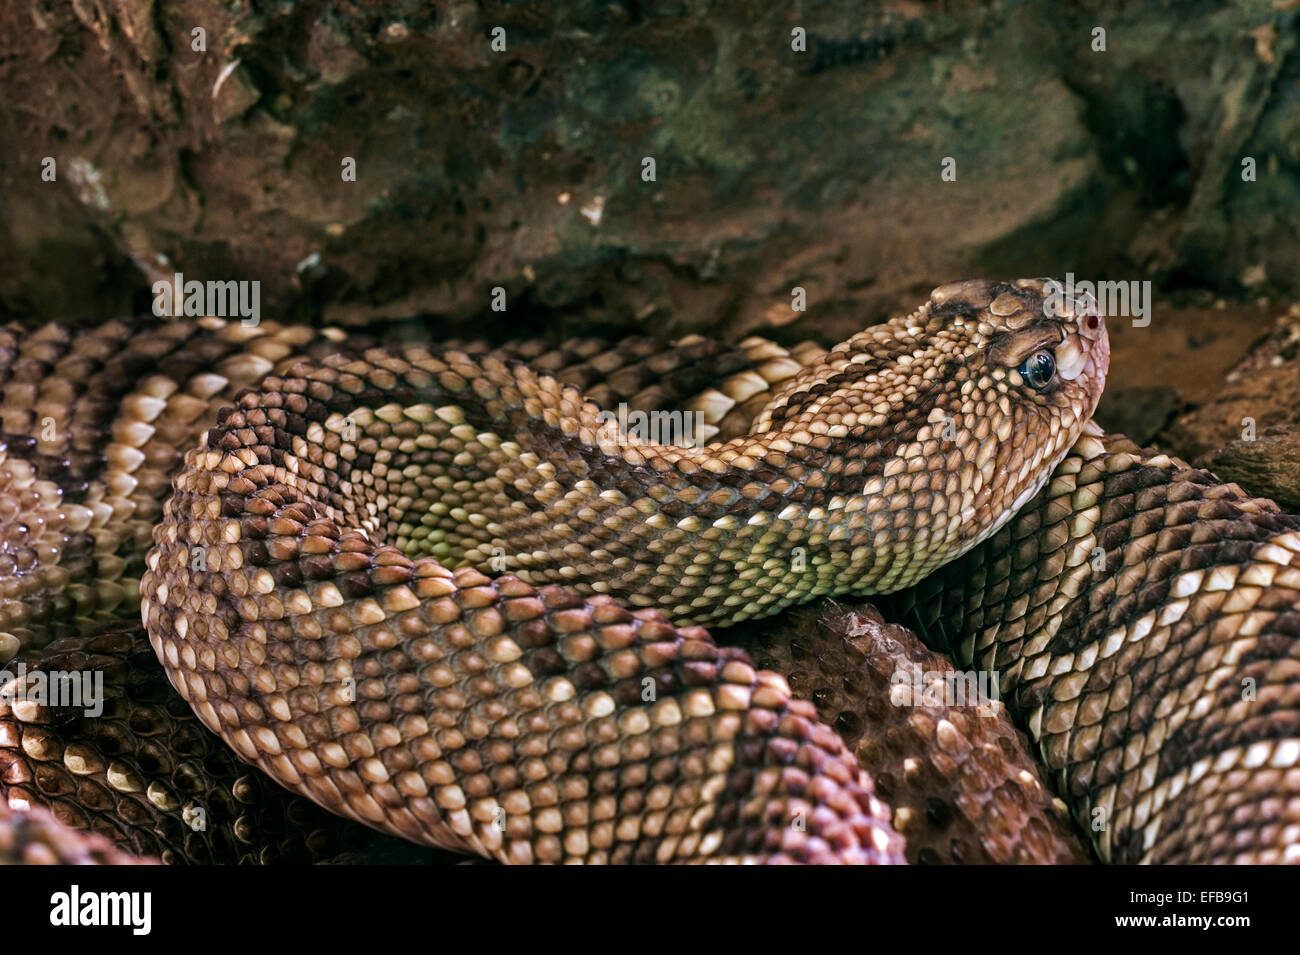 South American rattlesnake / tropical rattlesnake / neotropical rattlesnake / Guiana rattlesnake (Crotalus durissus terrificus) Stock Photo